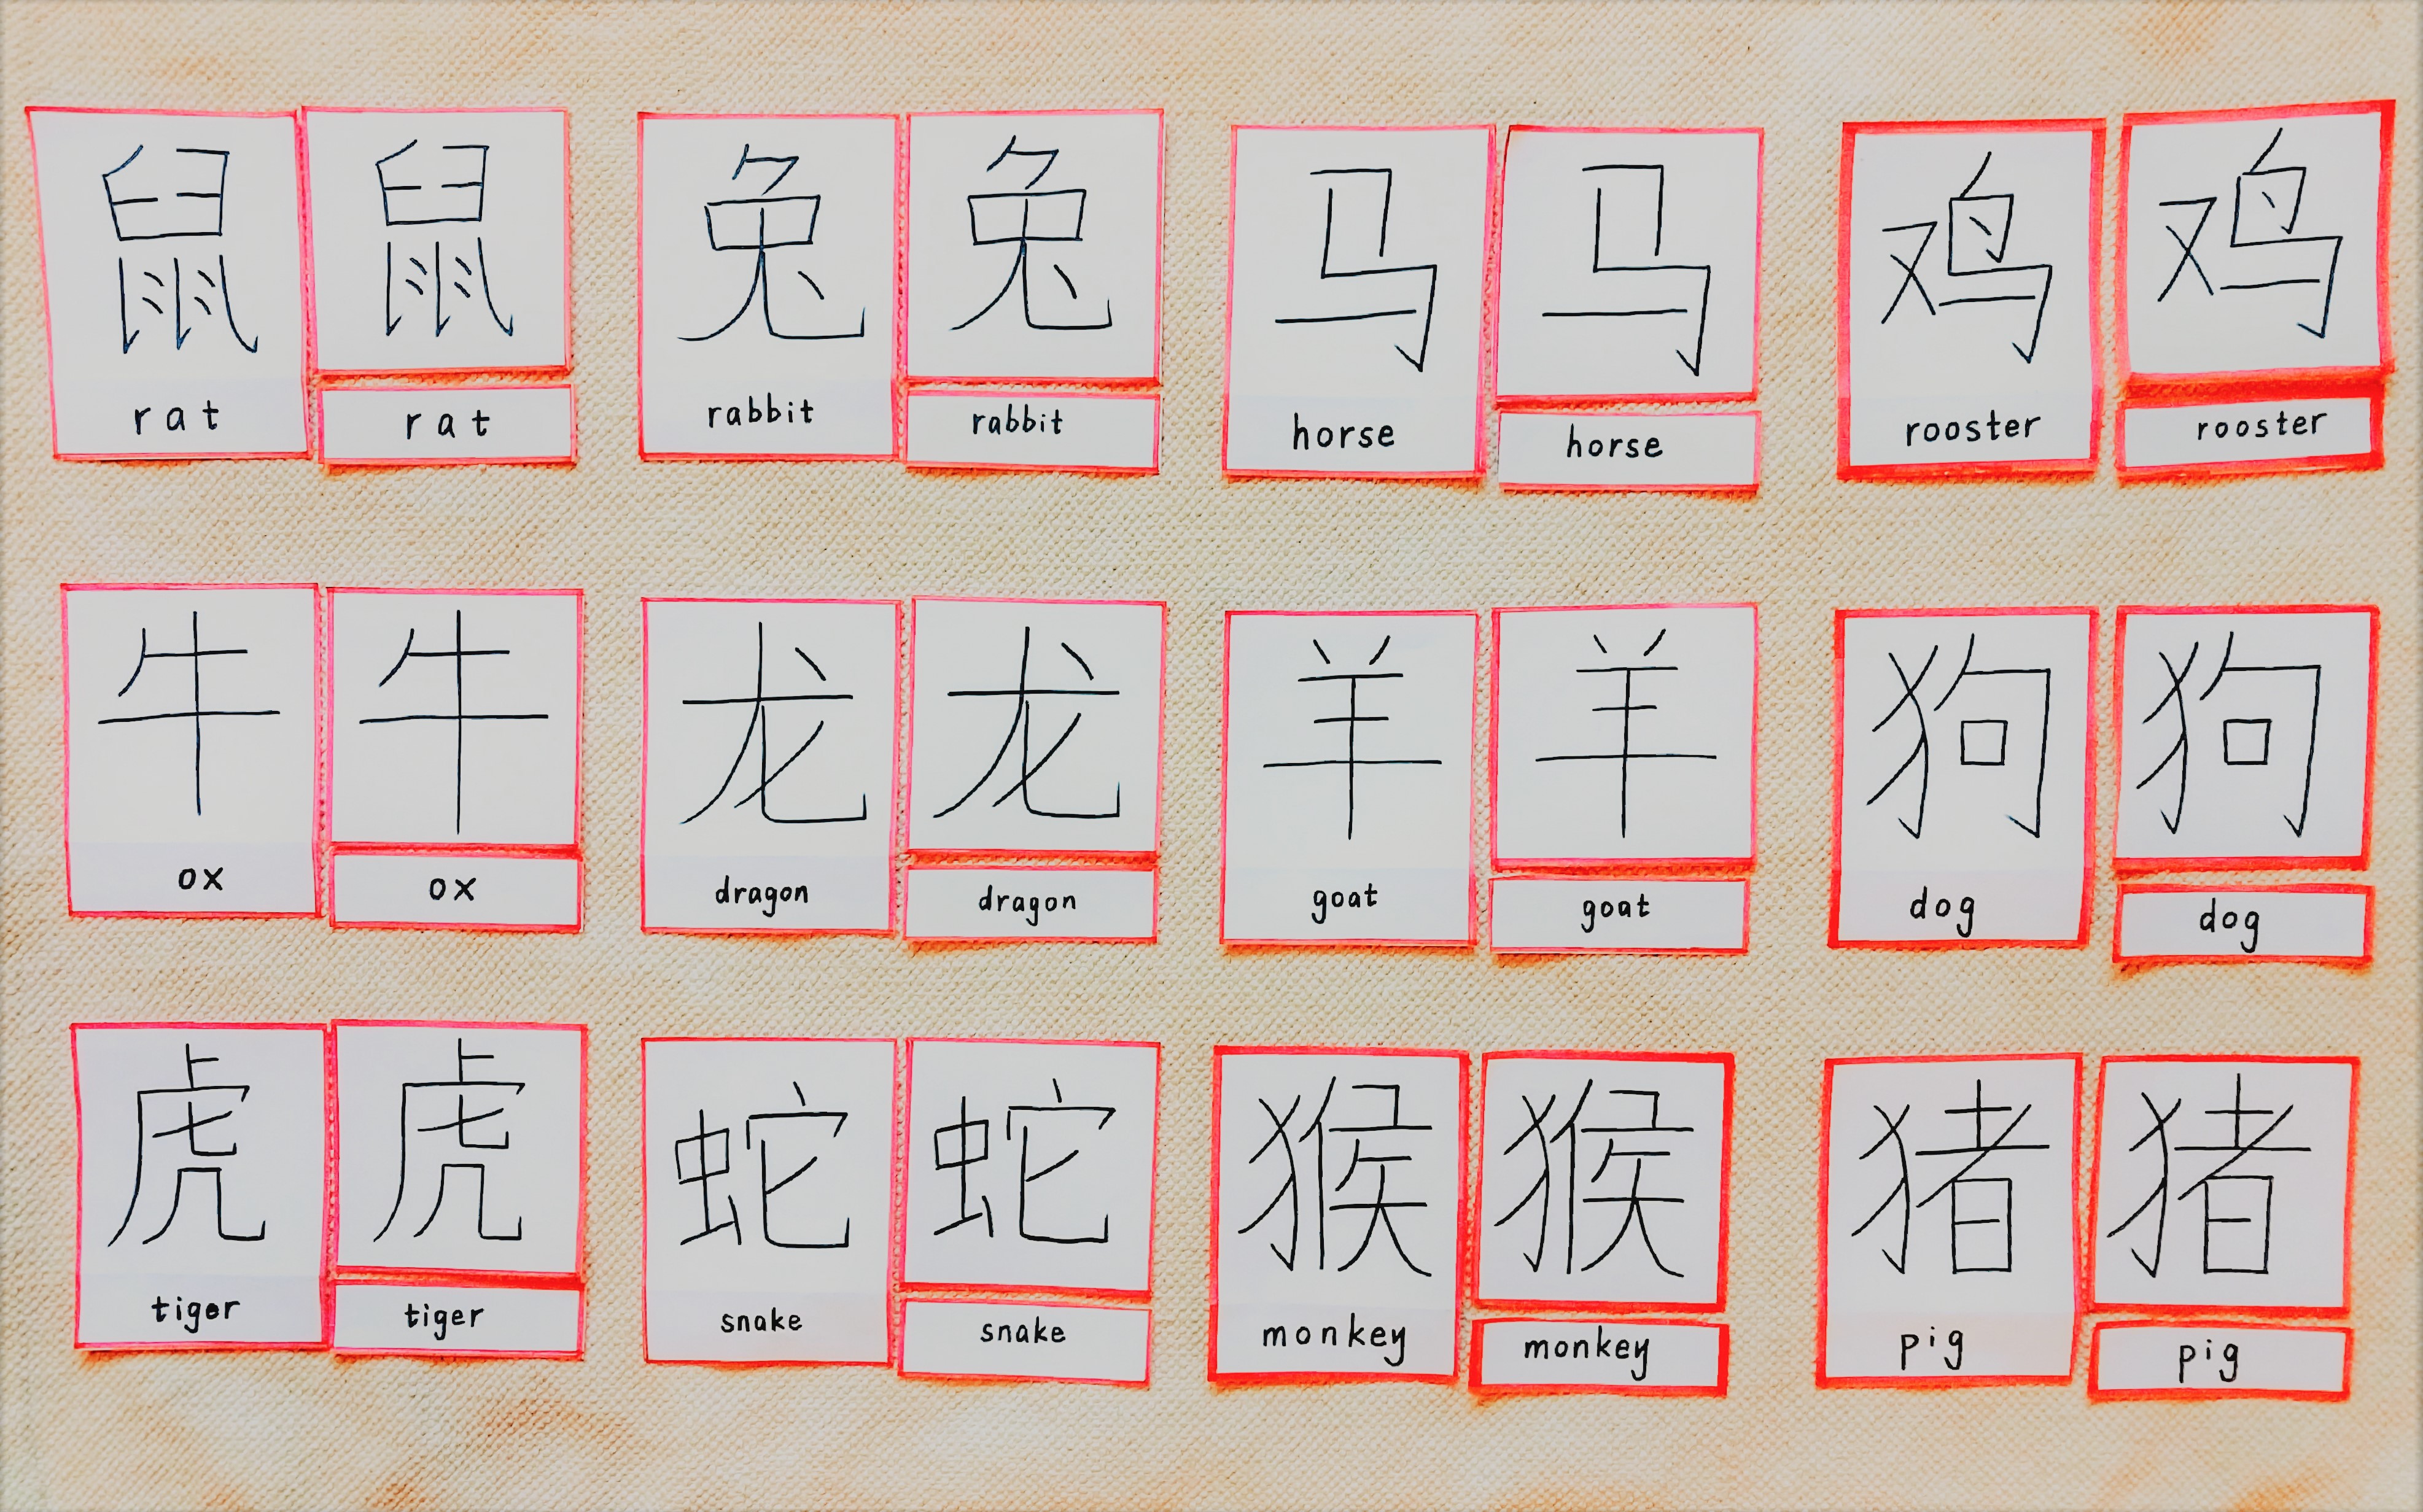 Three-part cards of Chinese zodiac characters